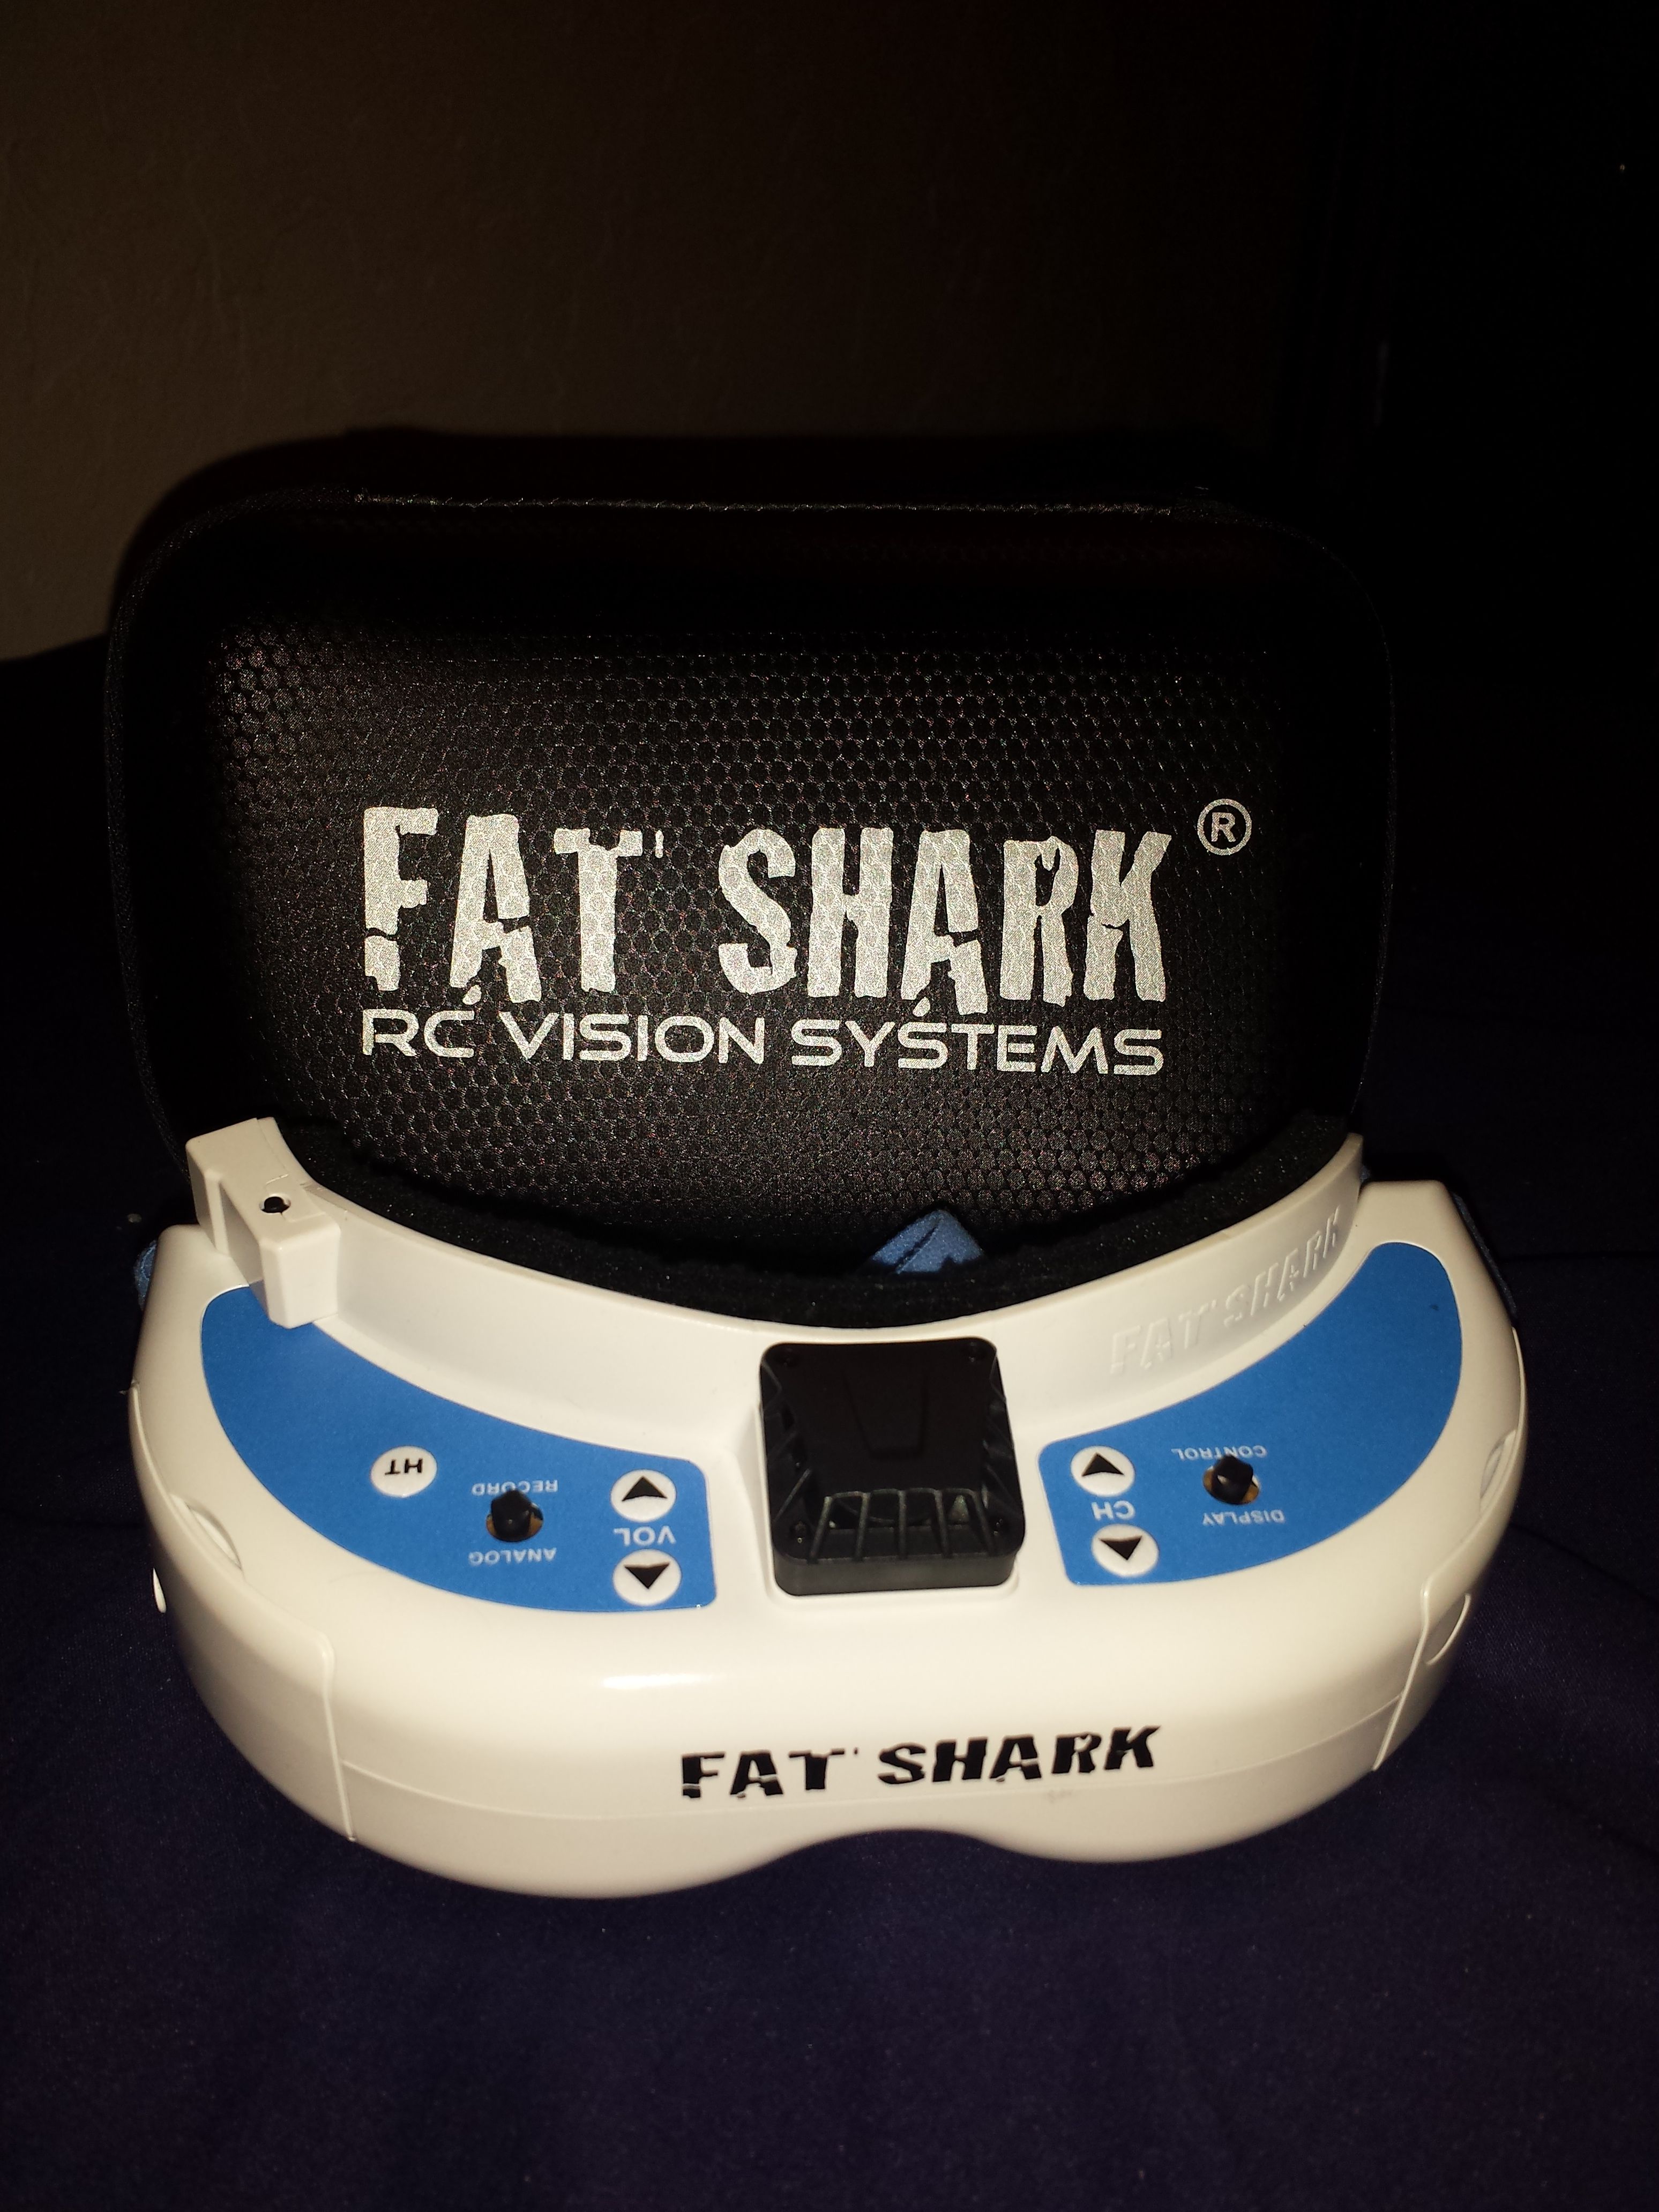 Fat Shark RC vision systems for drones